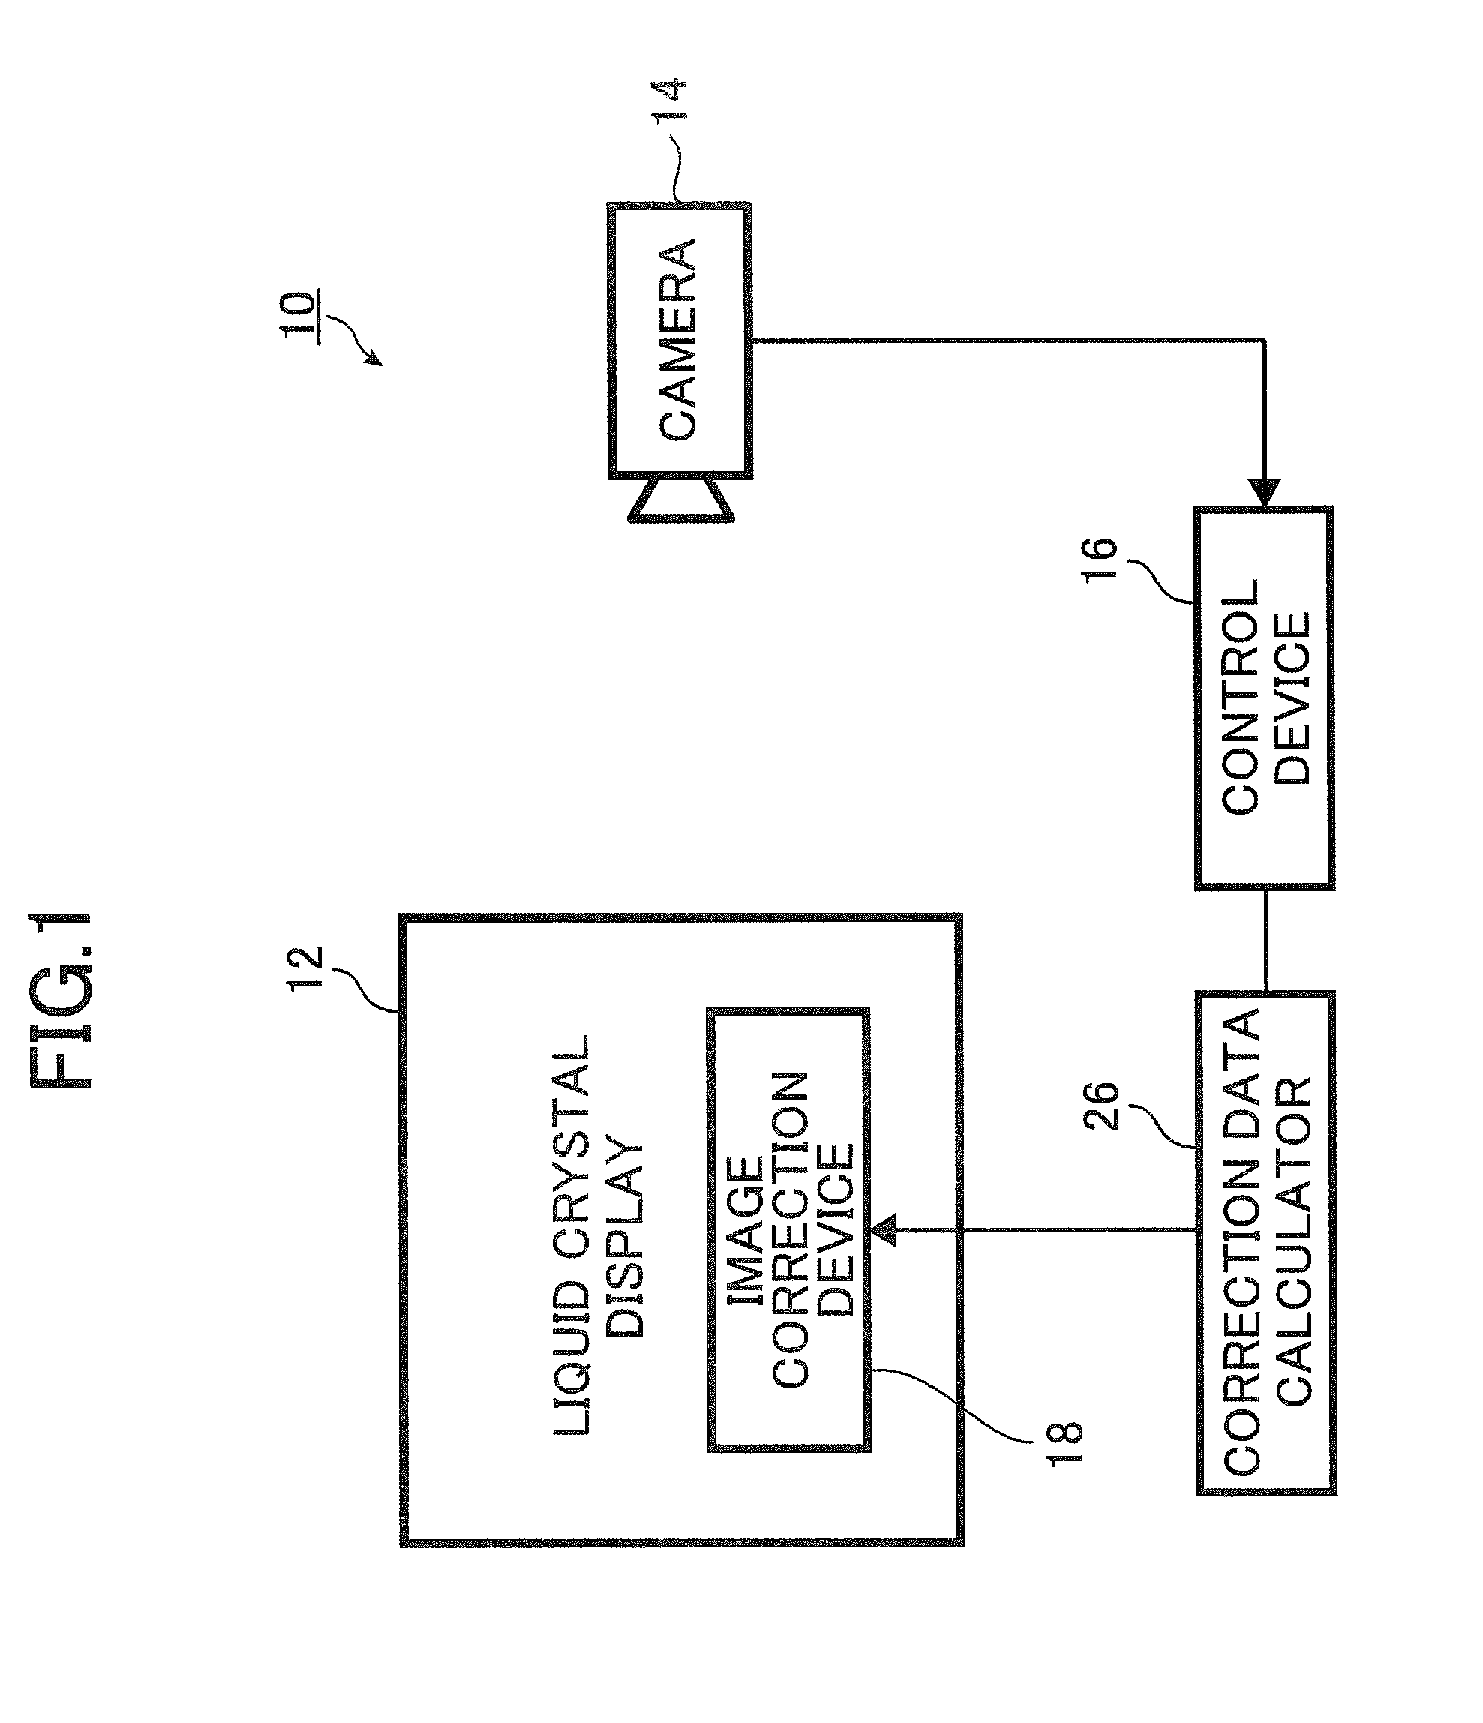 Image display device, correction data generation method, and image correction device and method, as well as image correction system